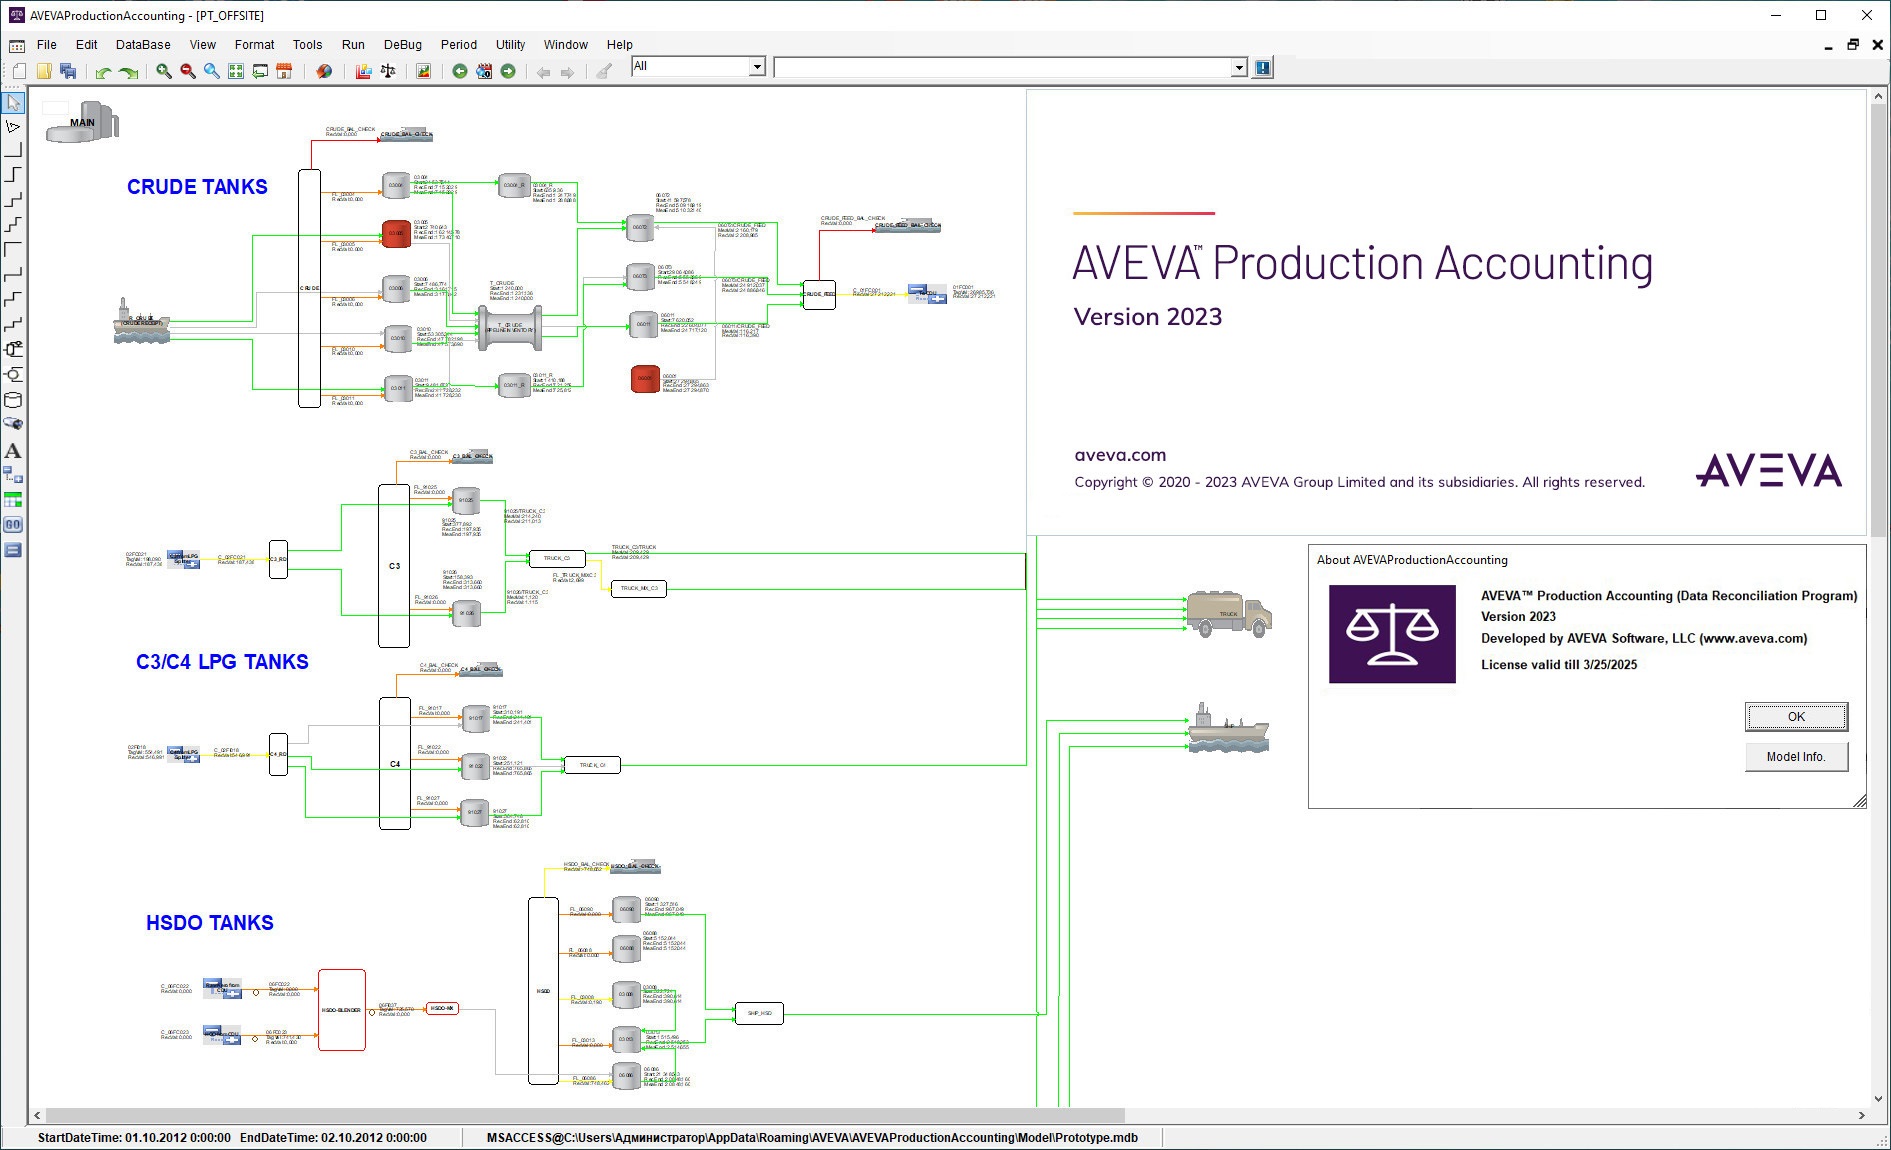 Working with AVEVA Production Accounting 2023 full license